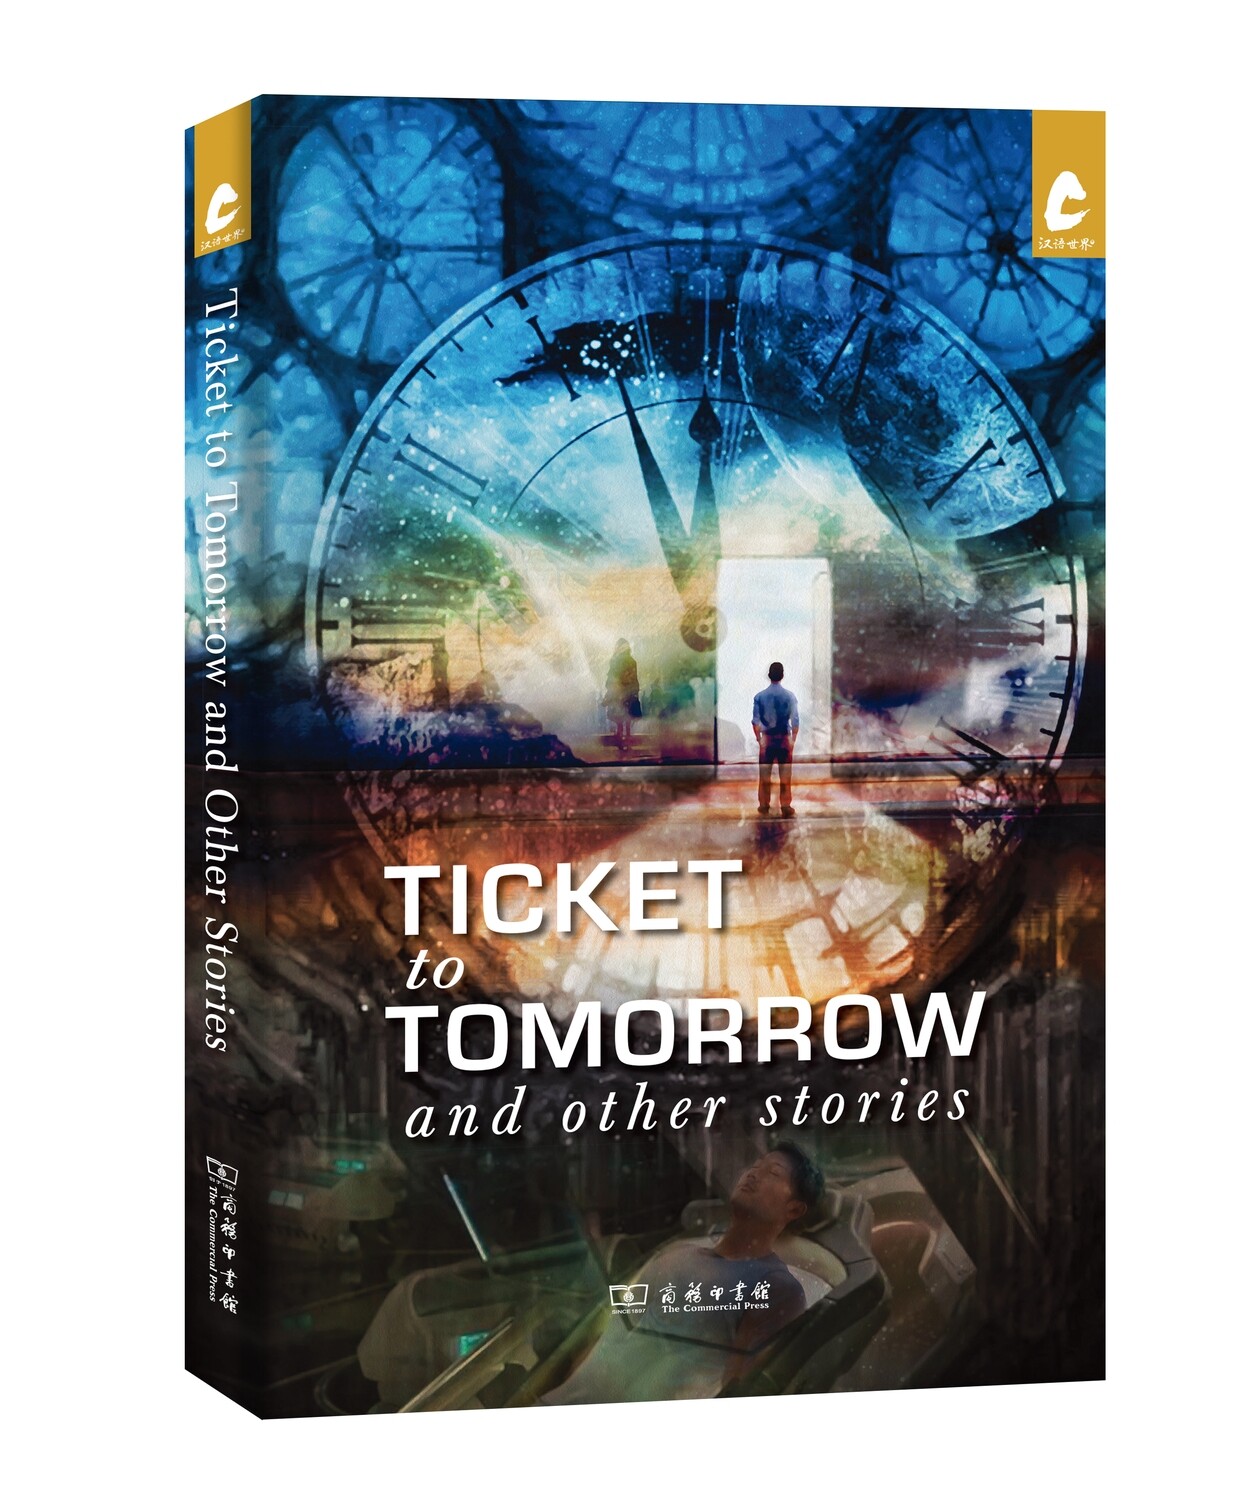 Ticket to Tomorrow and Other Stories